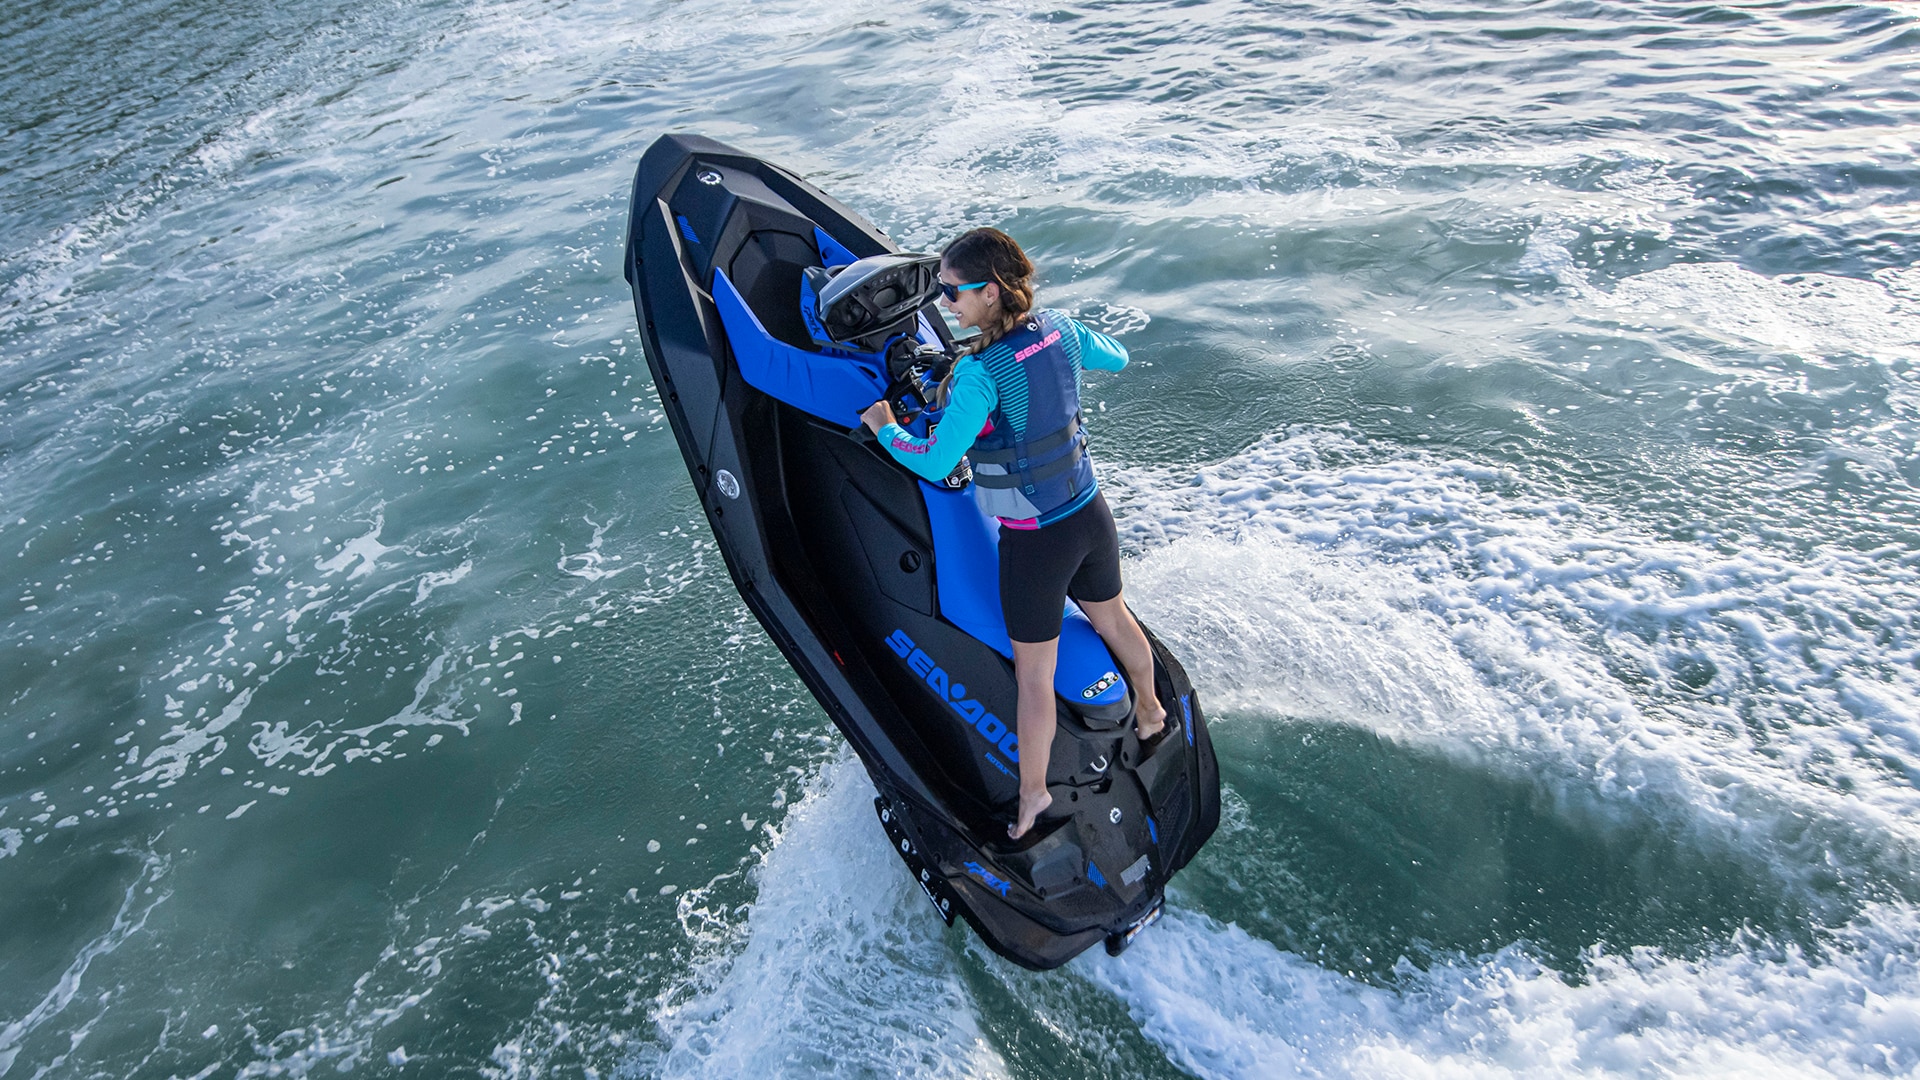 A woman rider pulling off a trick on a Sea-Doo Spark Trixx personal watercraft